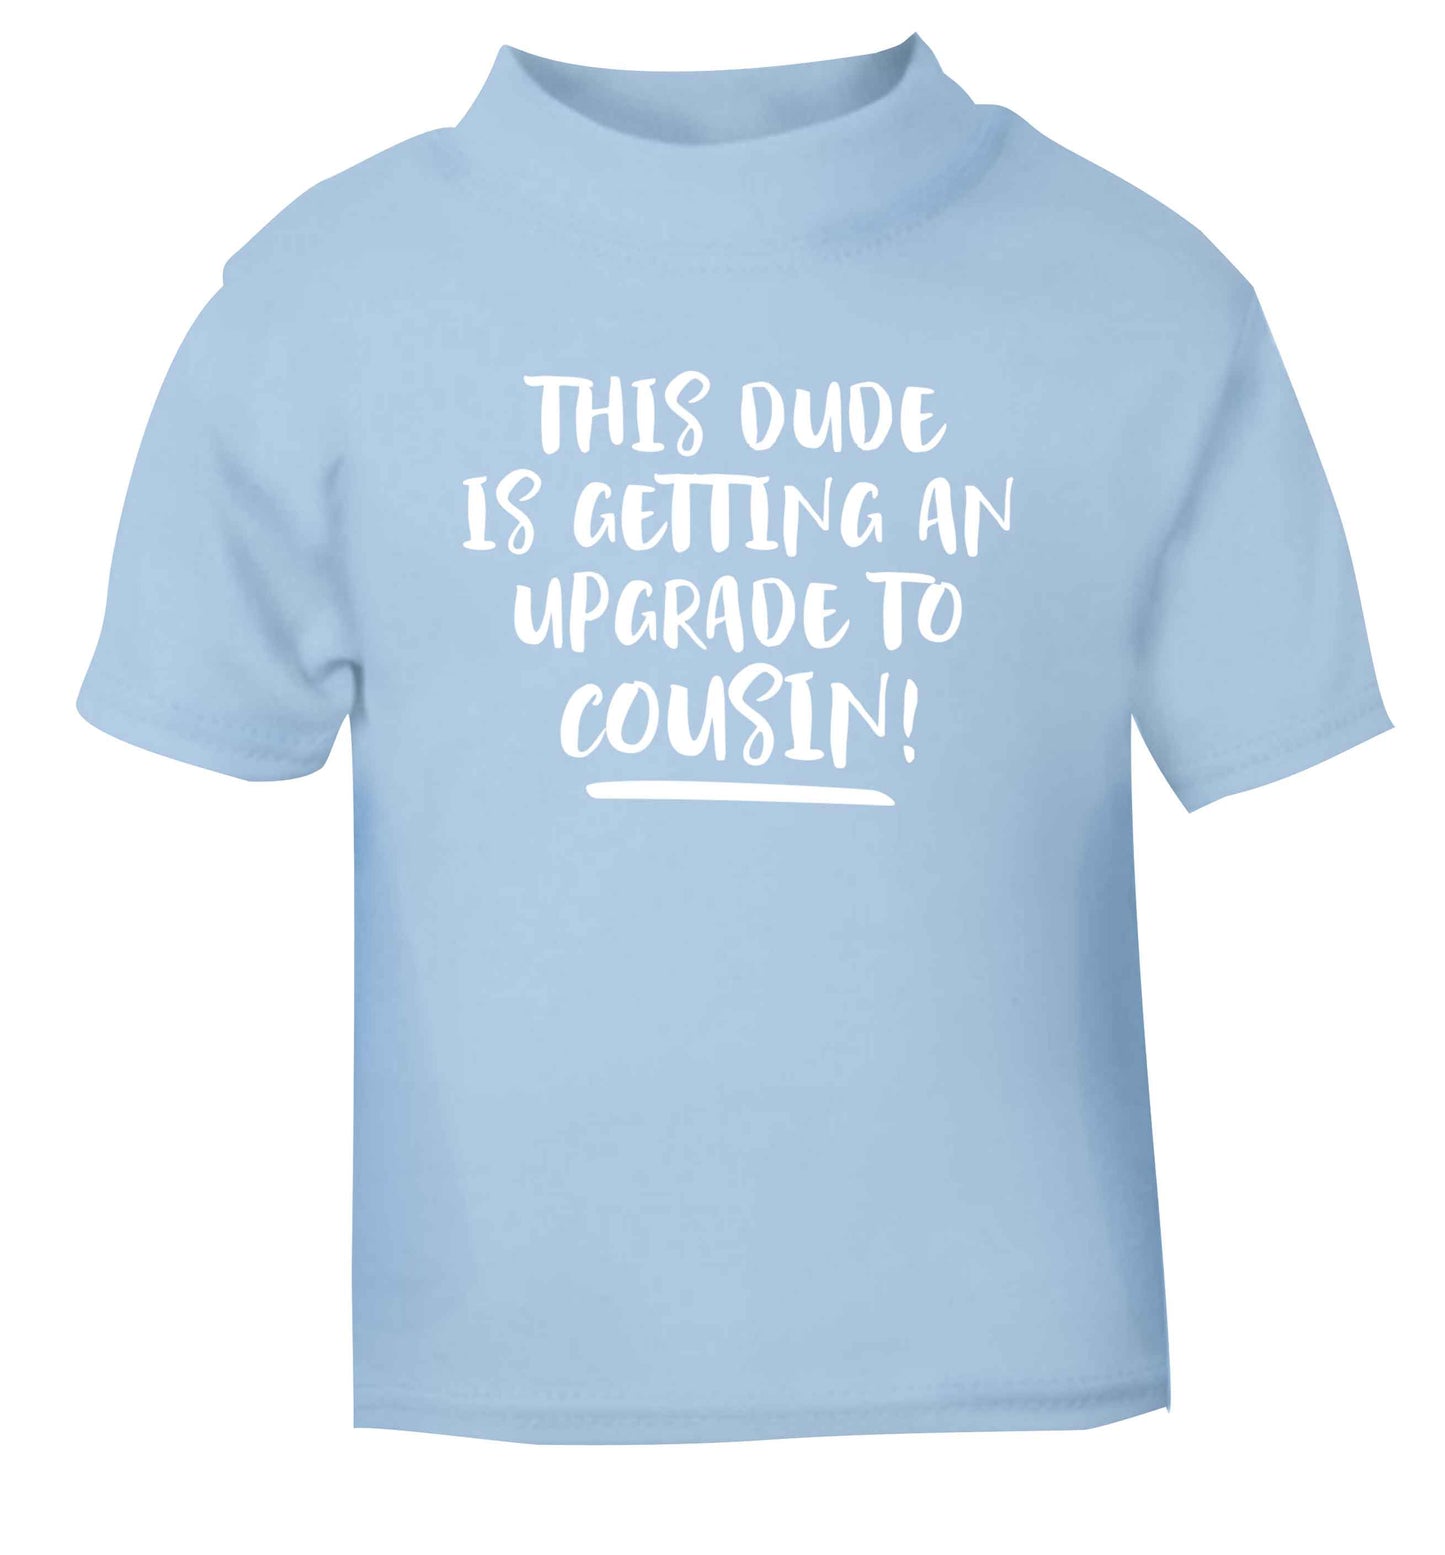 This dude is getting an upgrade to cousin! light blue Baby Toddler Tshirt 2 Years